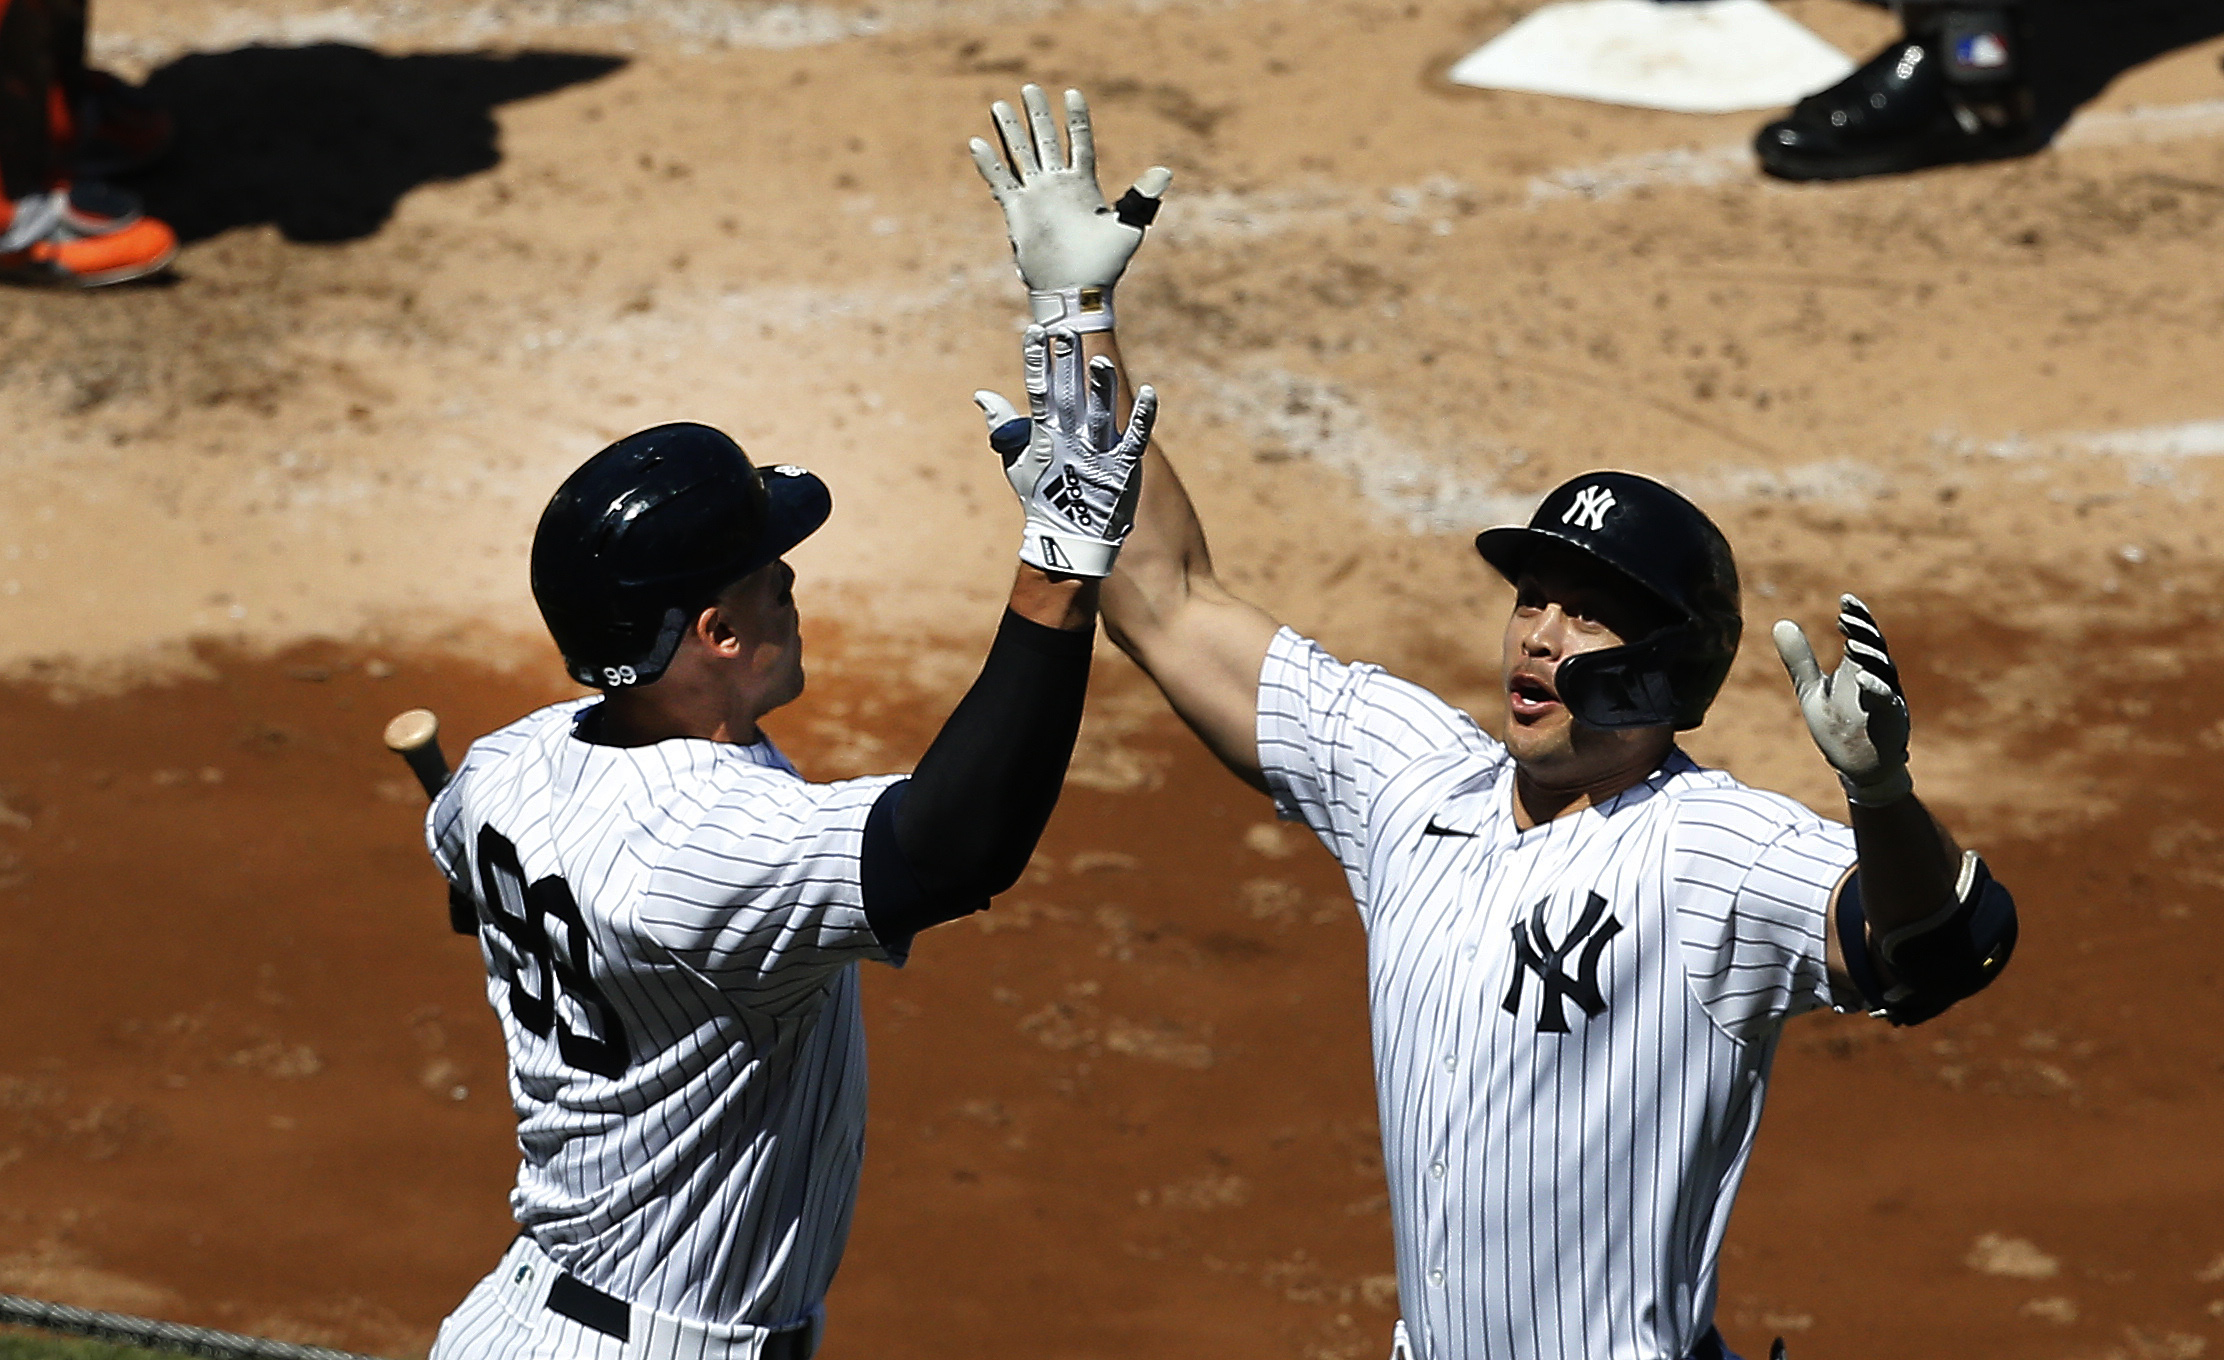 New York Yankees designated hitter Giancarlo Stanton is congratulated by right fielder Aaron Judge after hitting a solo home run against the Houston Astros during the third inning at Yankee Stadium.